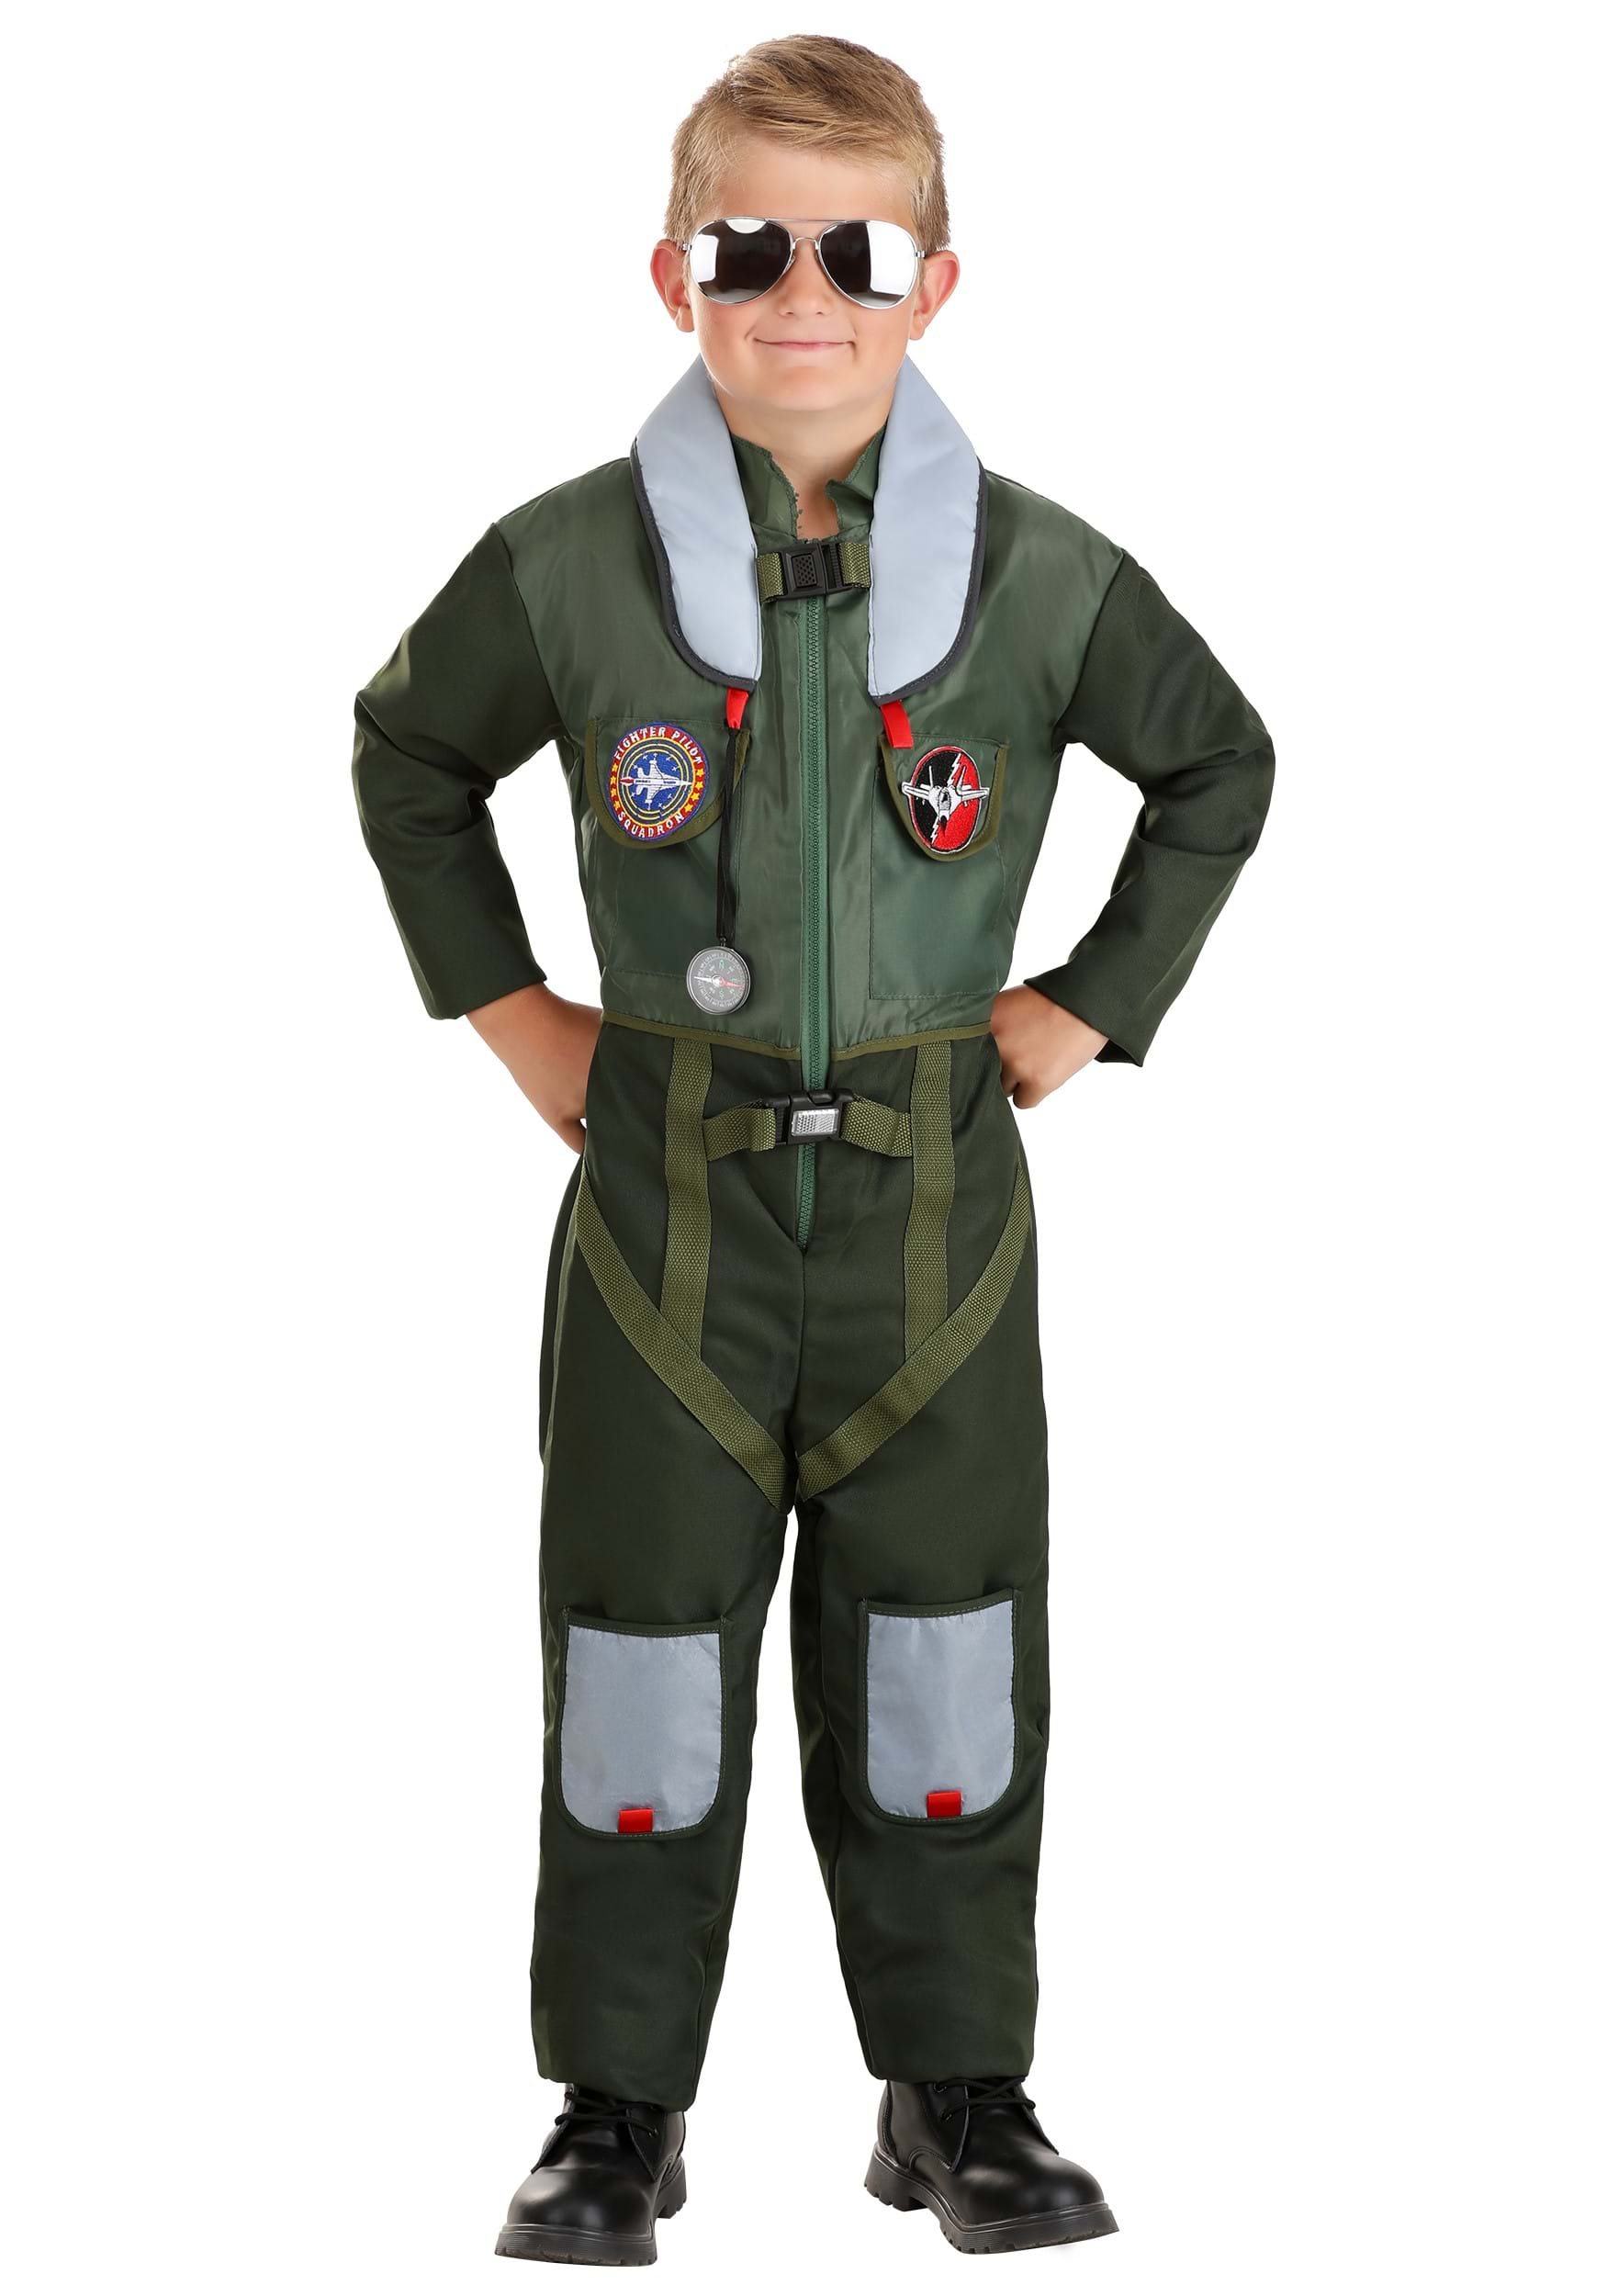 Dress Up America Pilot Costume for Kids - Airline India | Ubuy